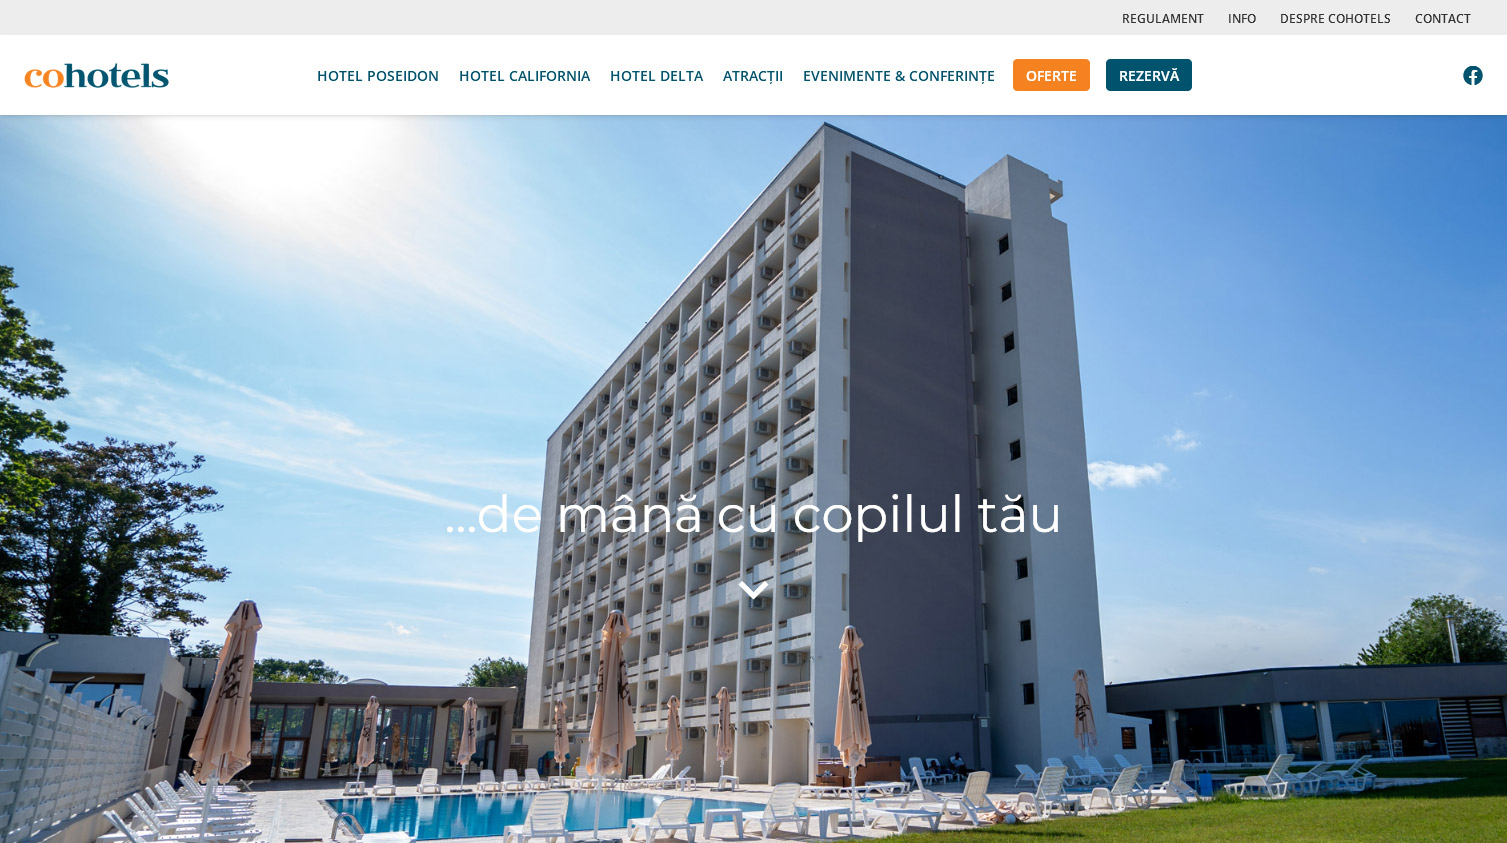 preview cohotels